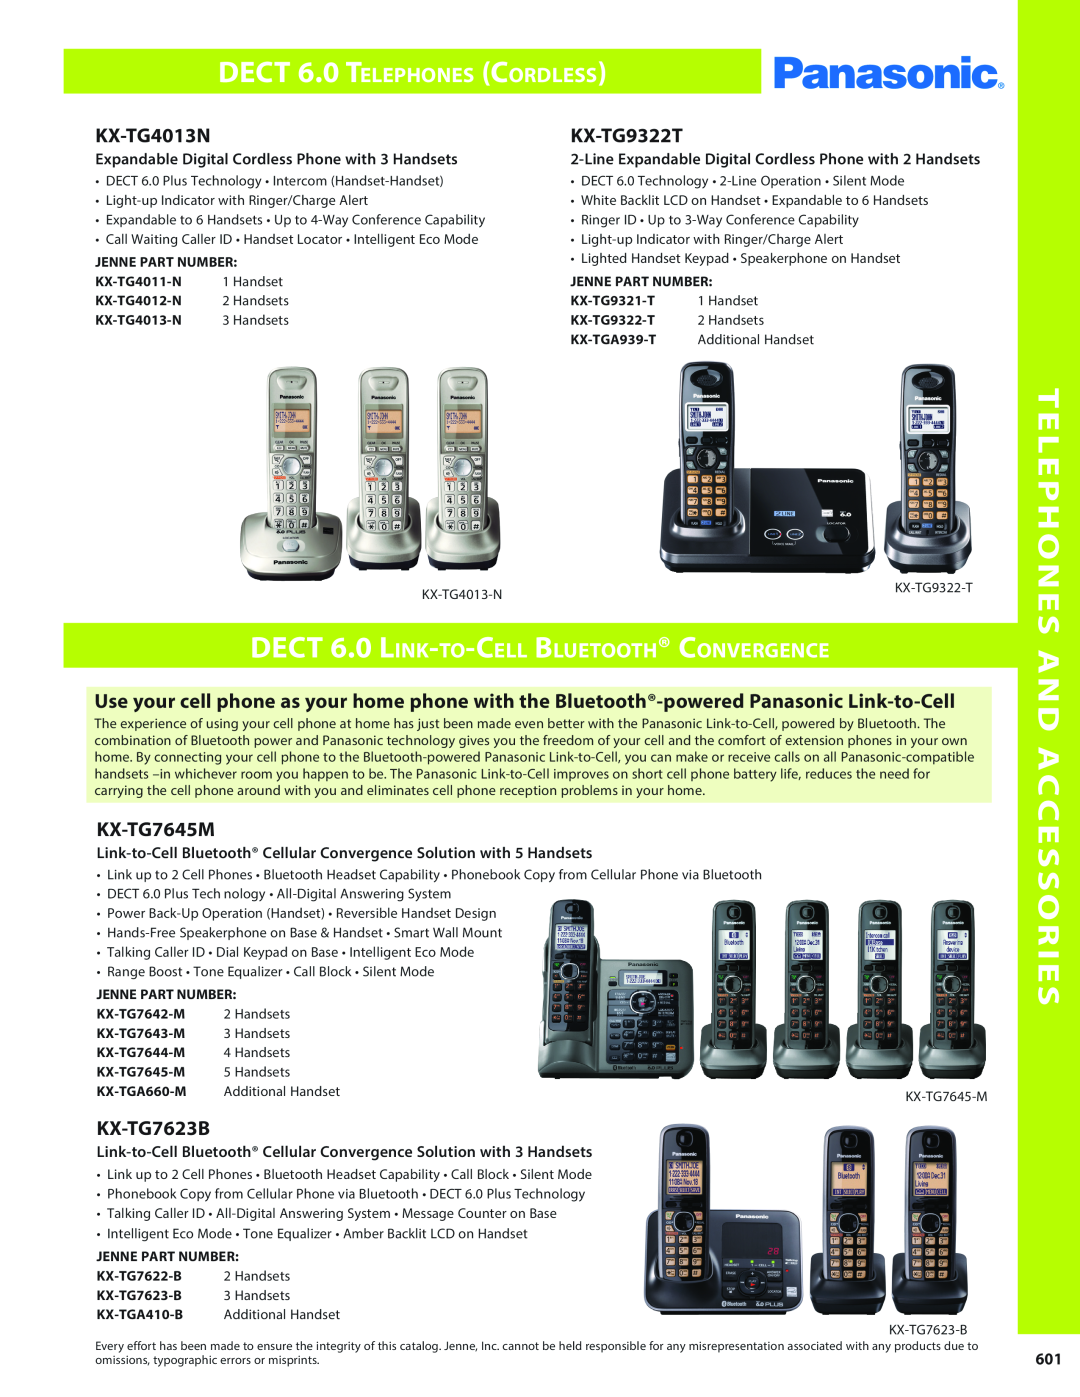 Panasonic PMPU2000 Telephones And Accessories, DECT 6.0 Telephones Cordless, DECT 6.0 Link-to-Cell Bluetooth Convergence 